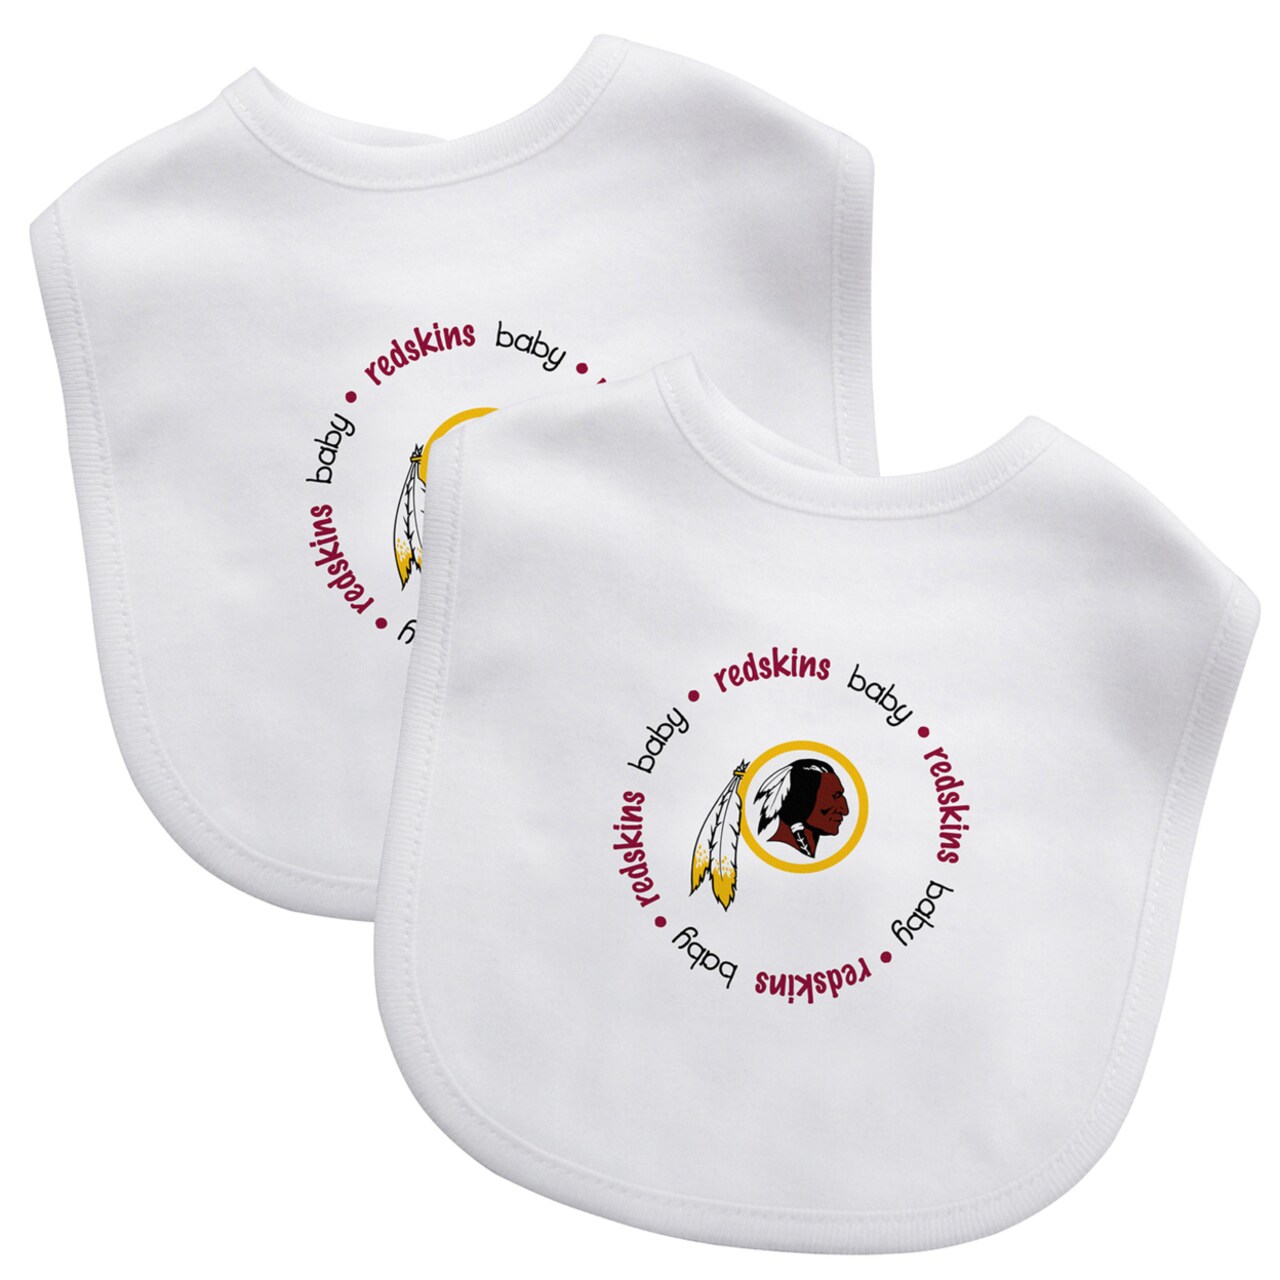 MasterPieces Baby Fanatic Officially Licensed Unisex Baby Bibs 2 Pack - NFL Washington  Redskins Baby Apparel Set